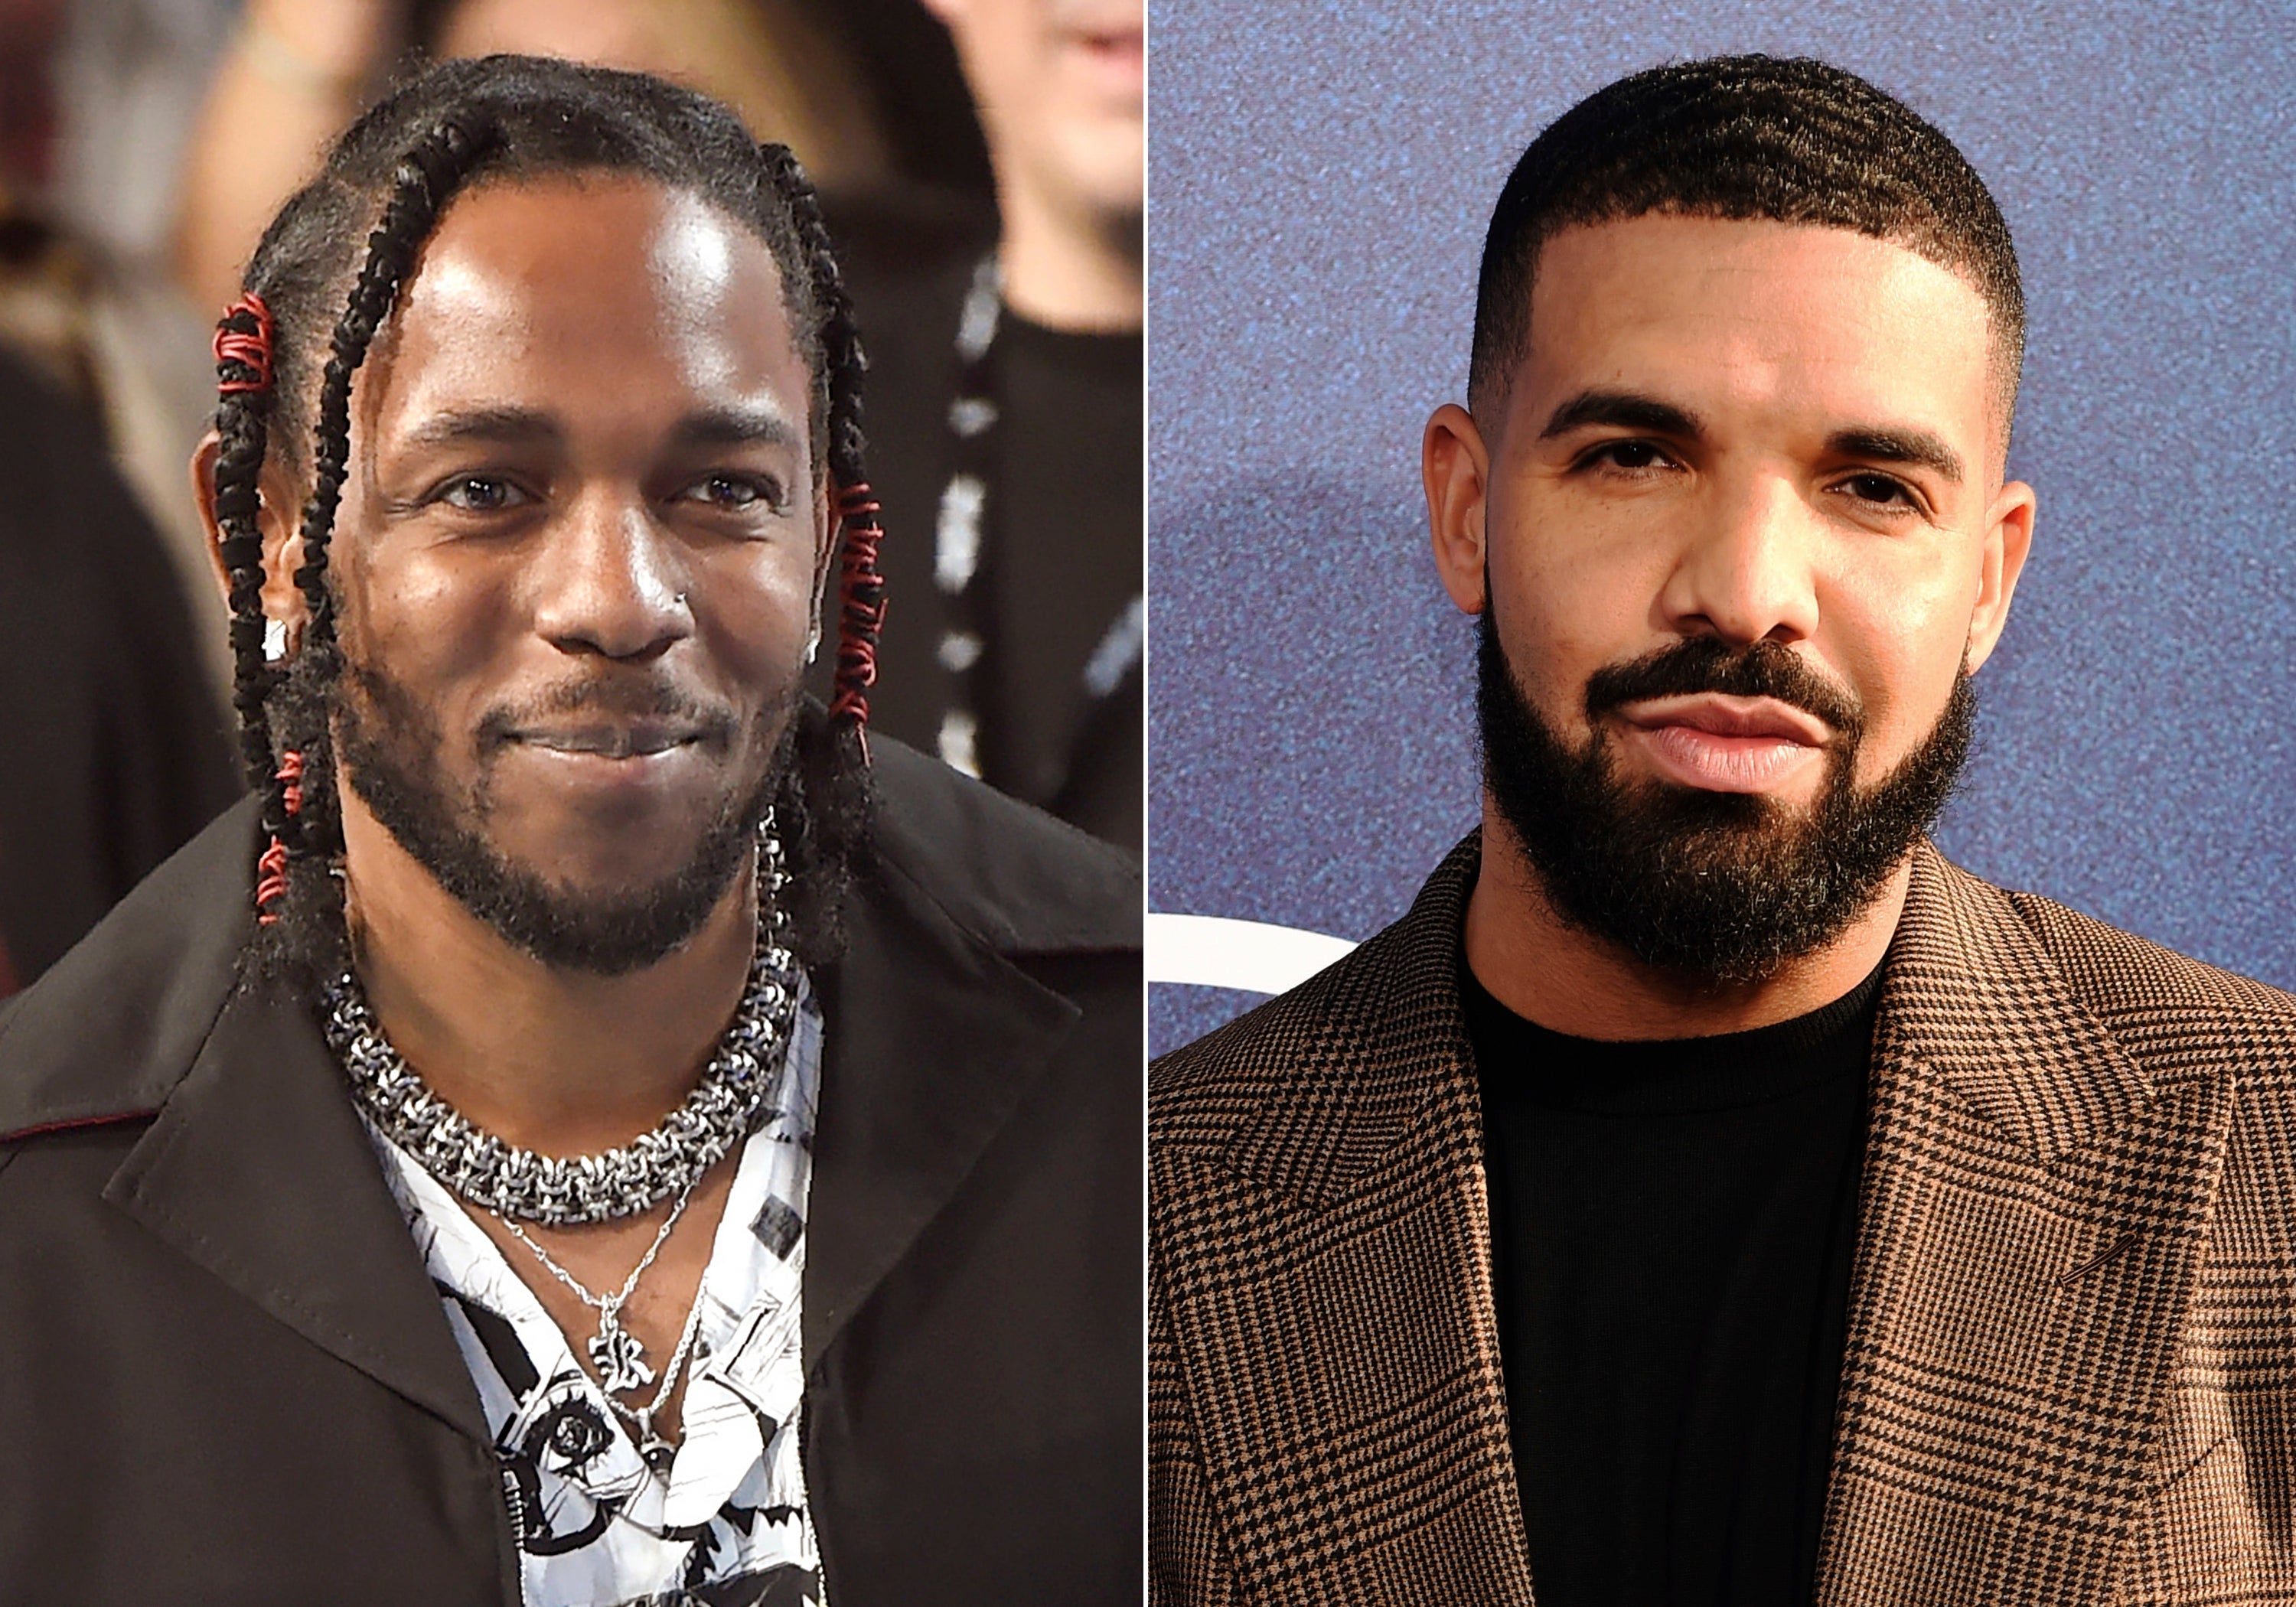 Police are investigating if the incidents are related to the ongoing feud between Kendrick Lamar (left) and Drake